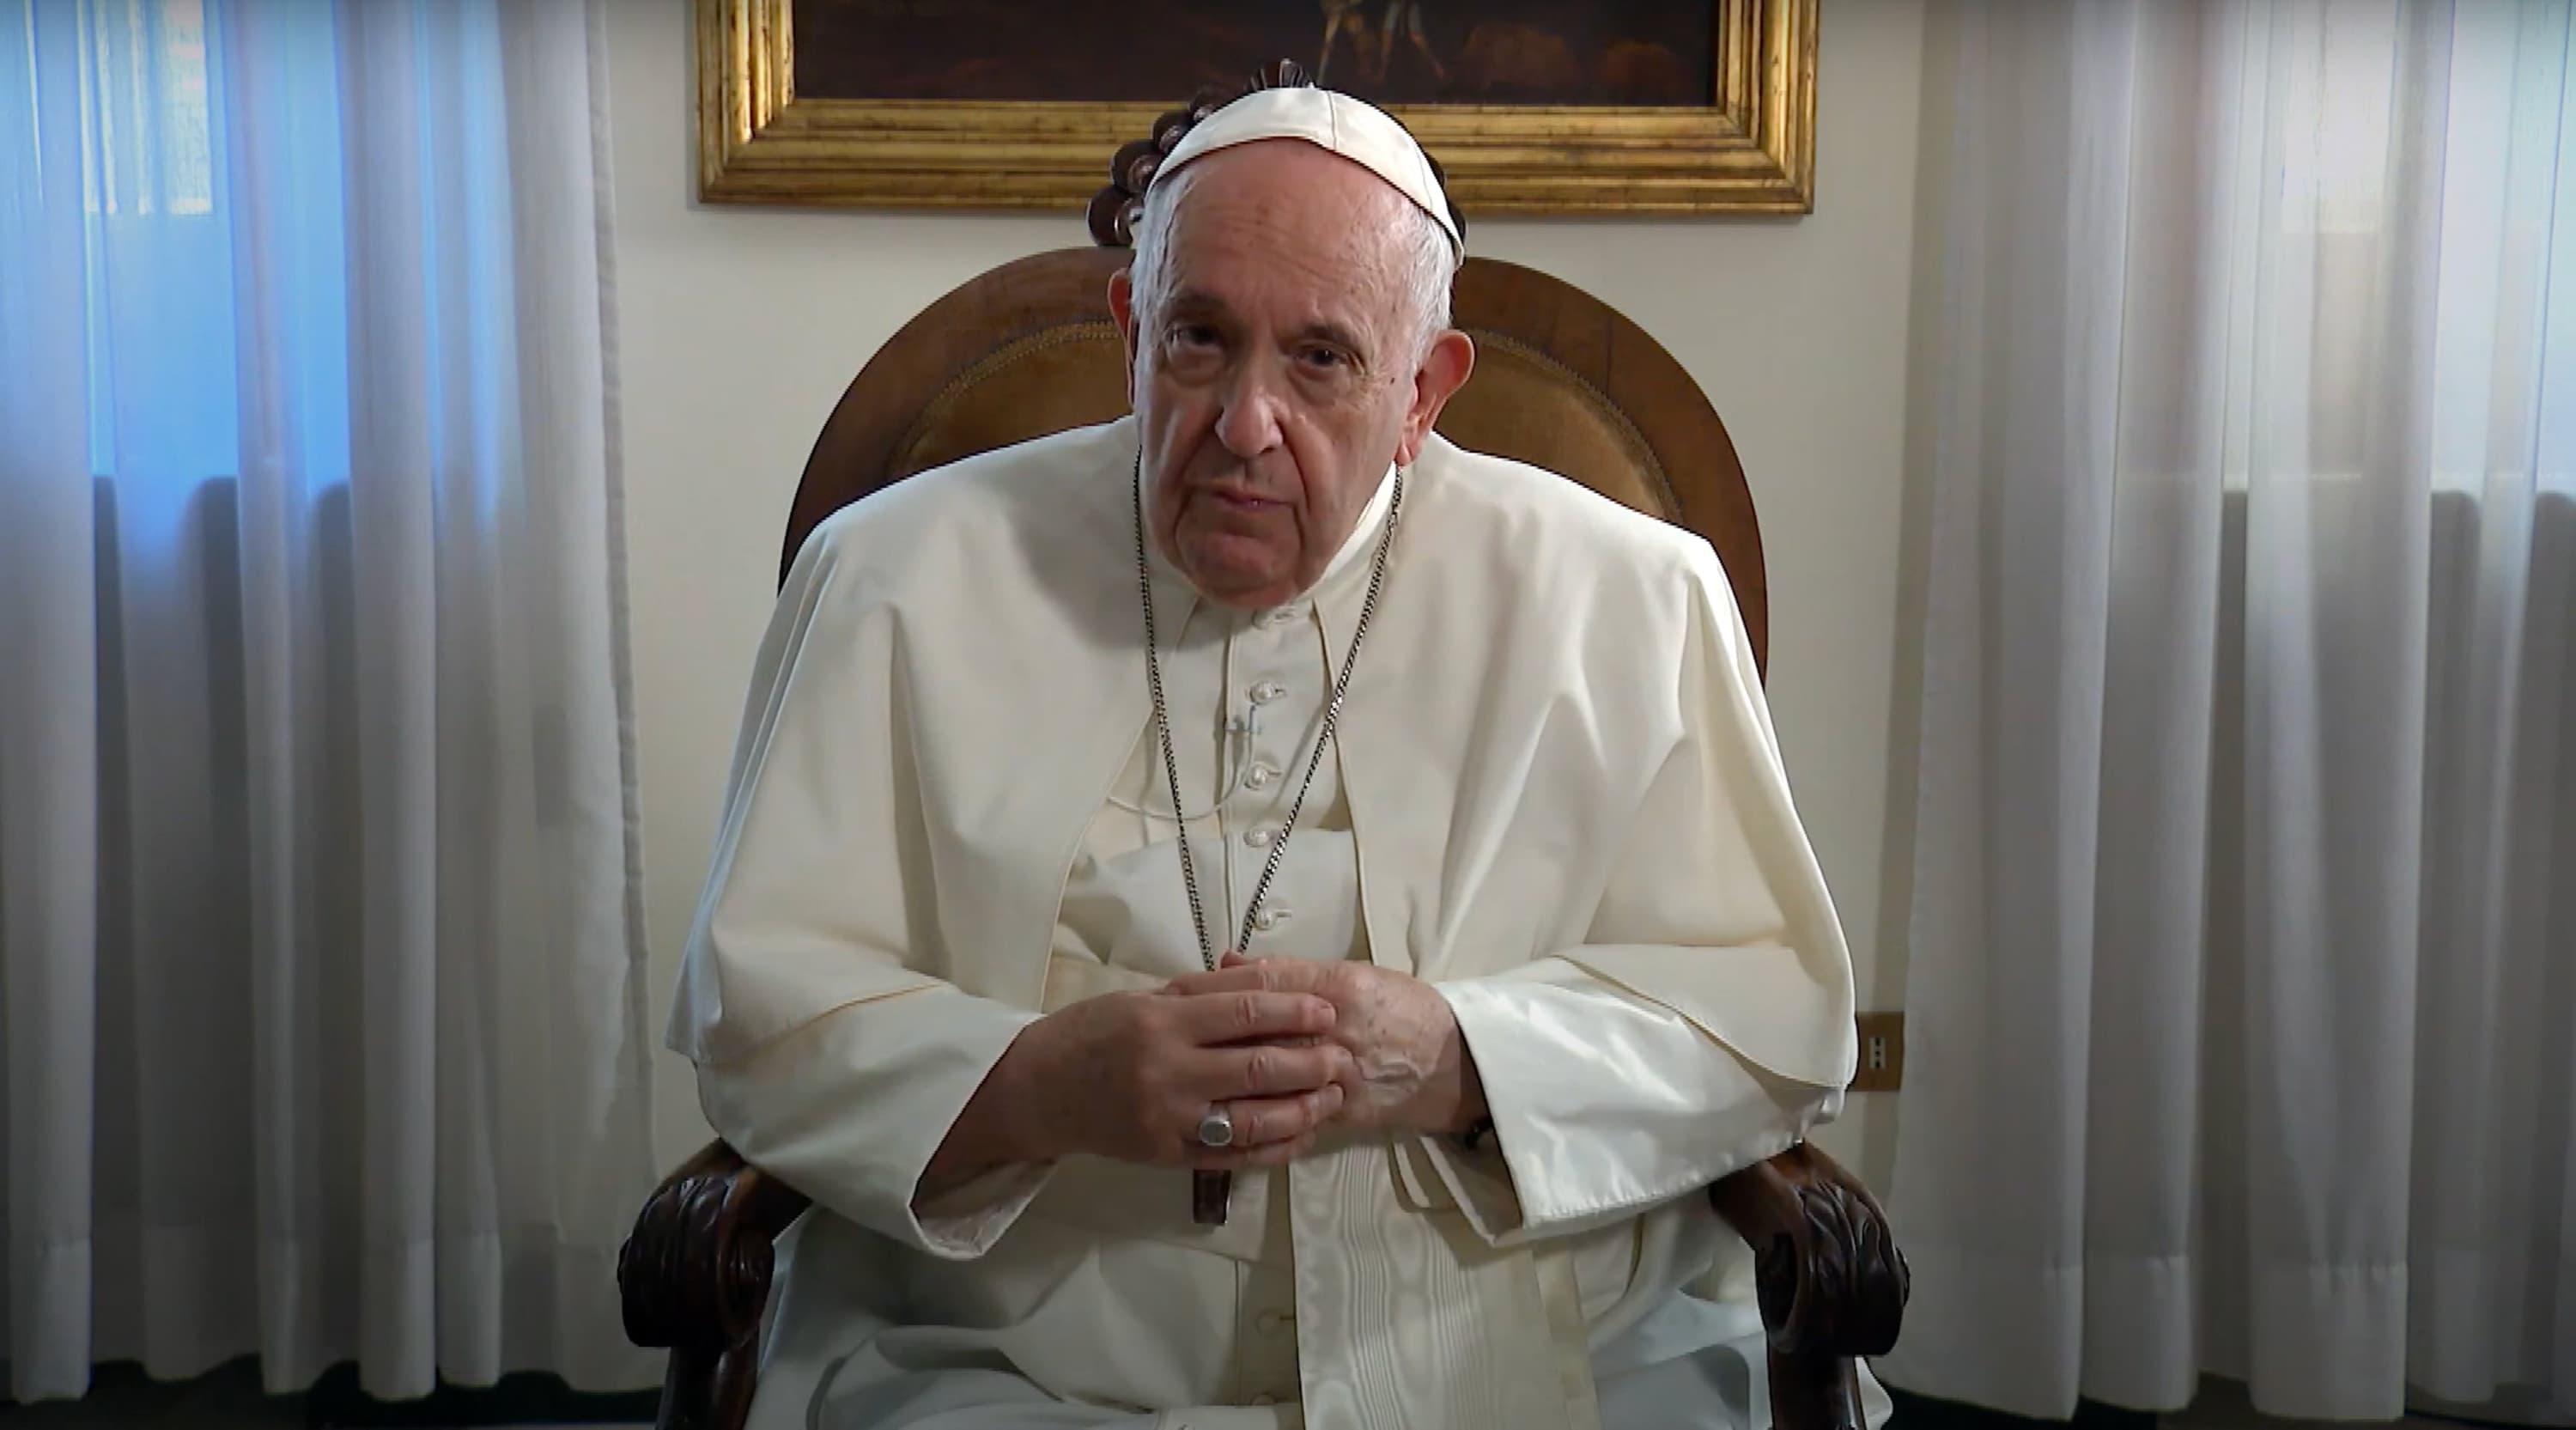 News Brief: Pope Francis Calls for Prayer to Abolish the Death Penalty